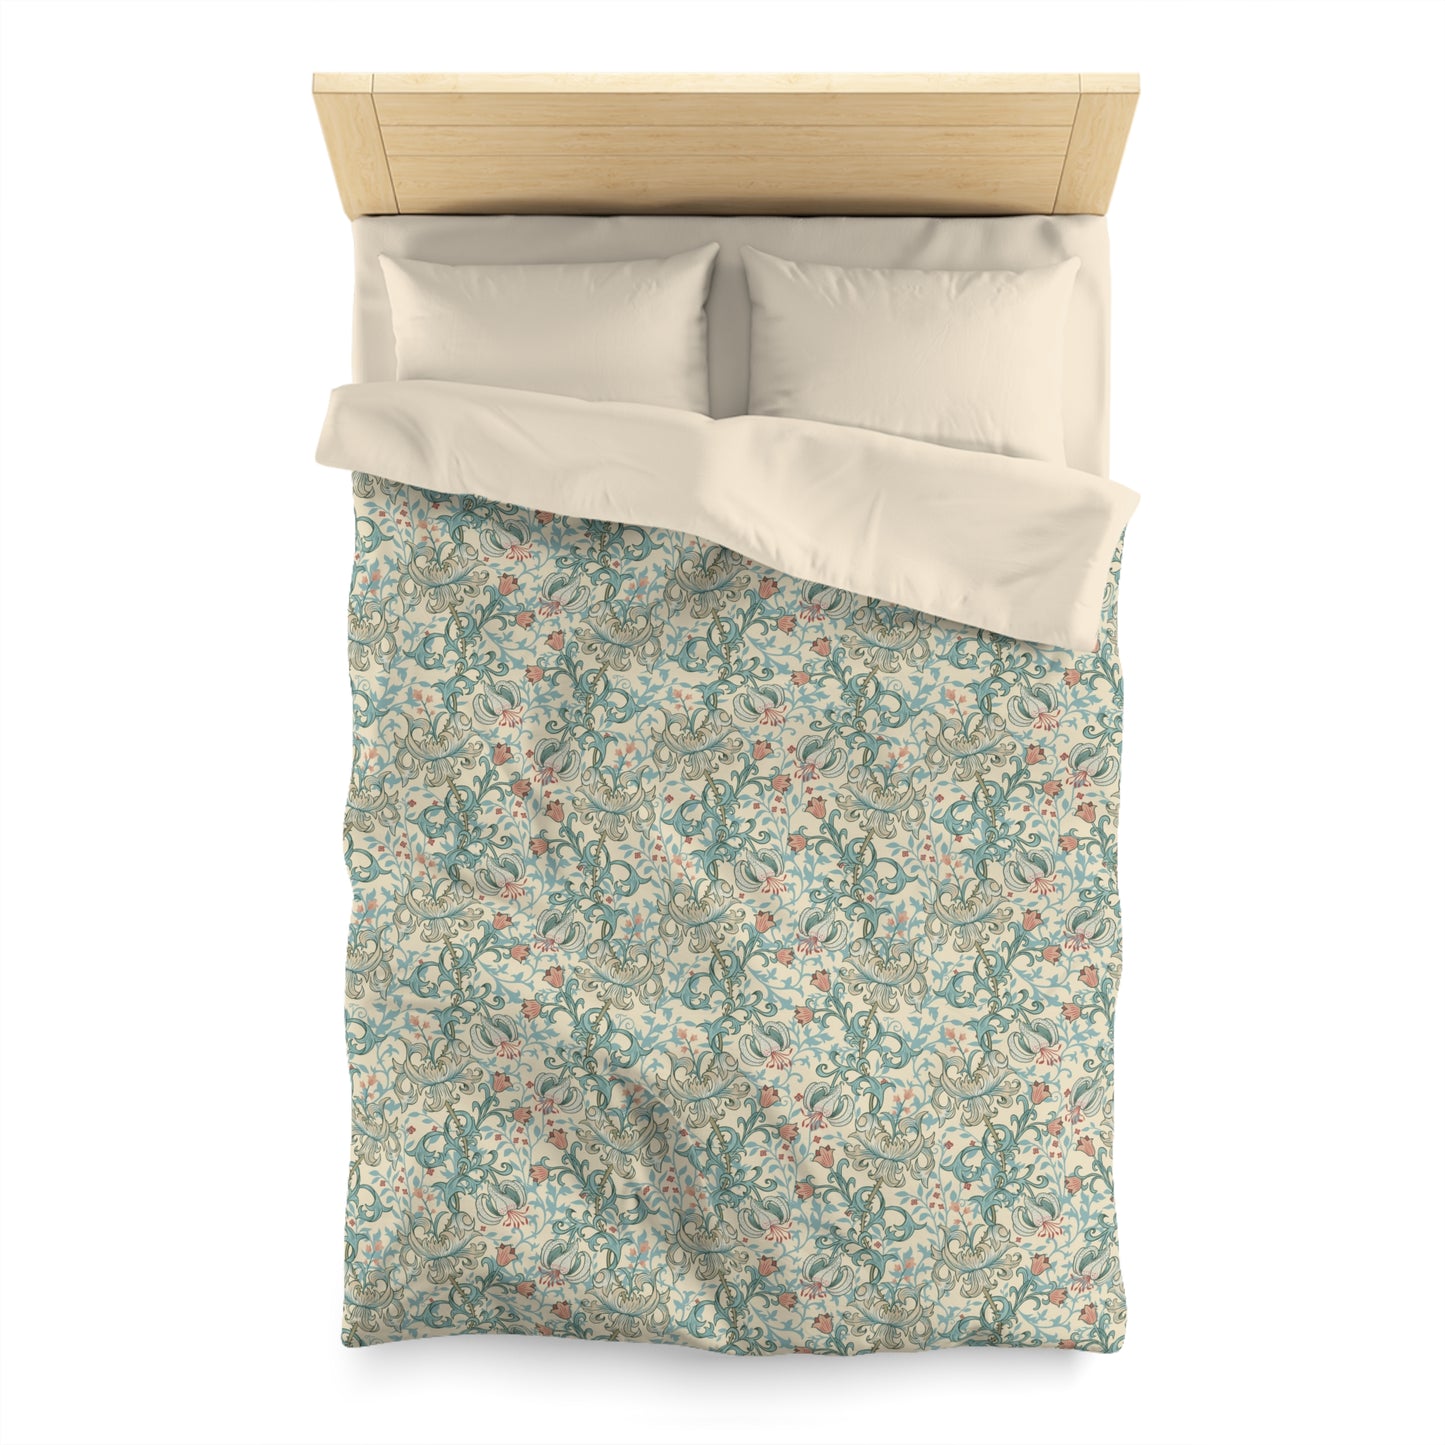 william-morris-co-duvet-cover-golden-lily-collection-mineral-3